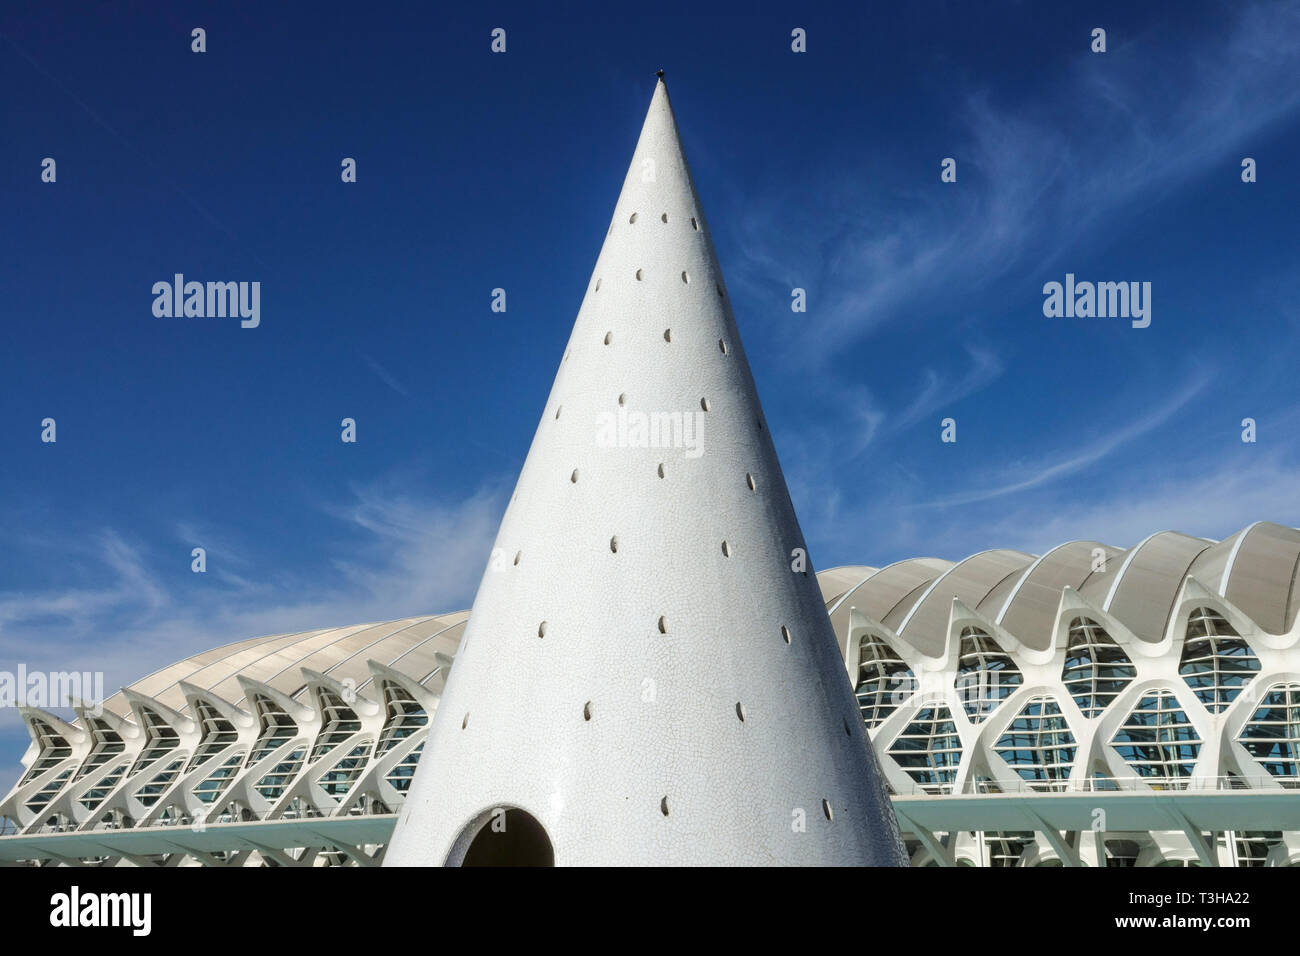 Valencia Spain city building Europe, Valencia City of Arts and Sciences,  Spain modern architecture by Calatrava Cone Science Museum background Stock Photo